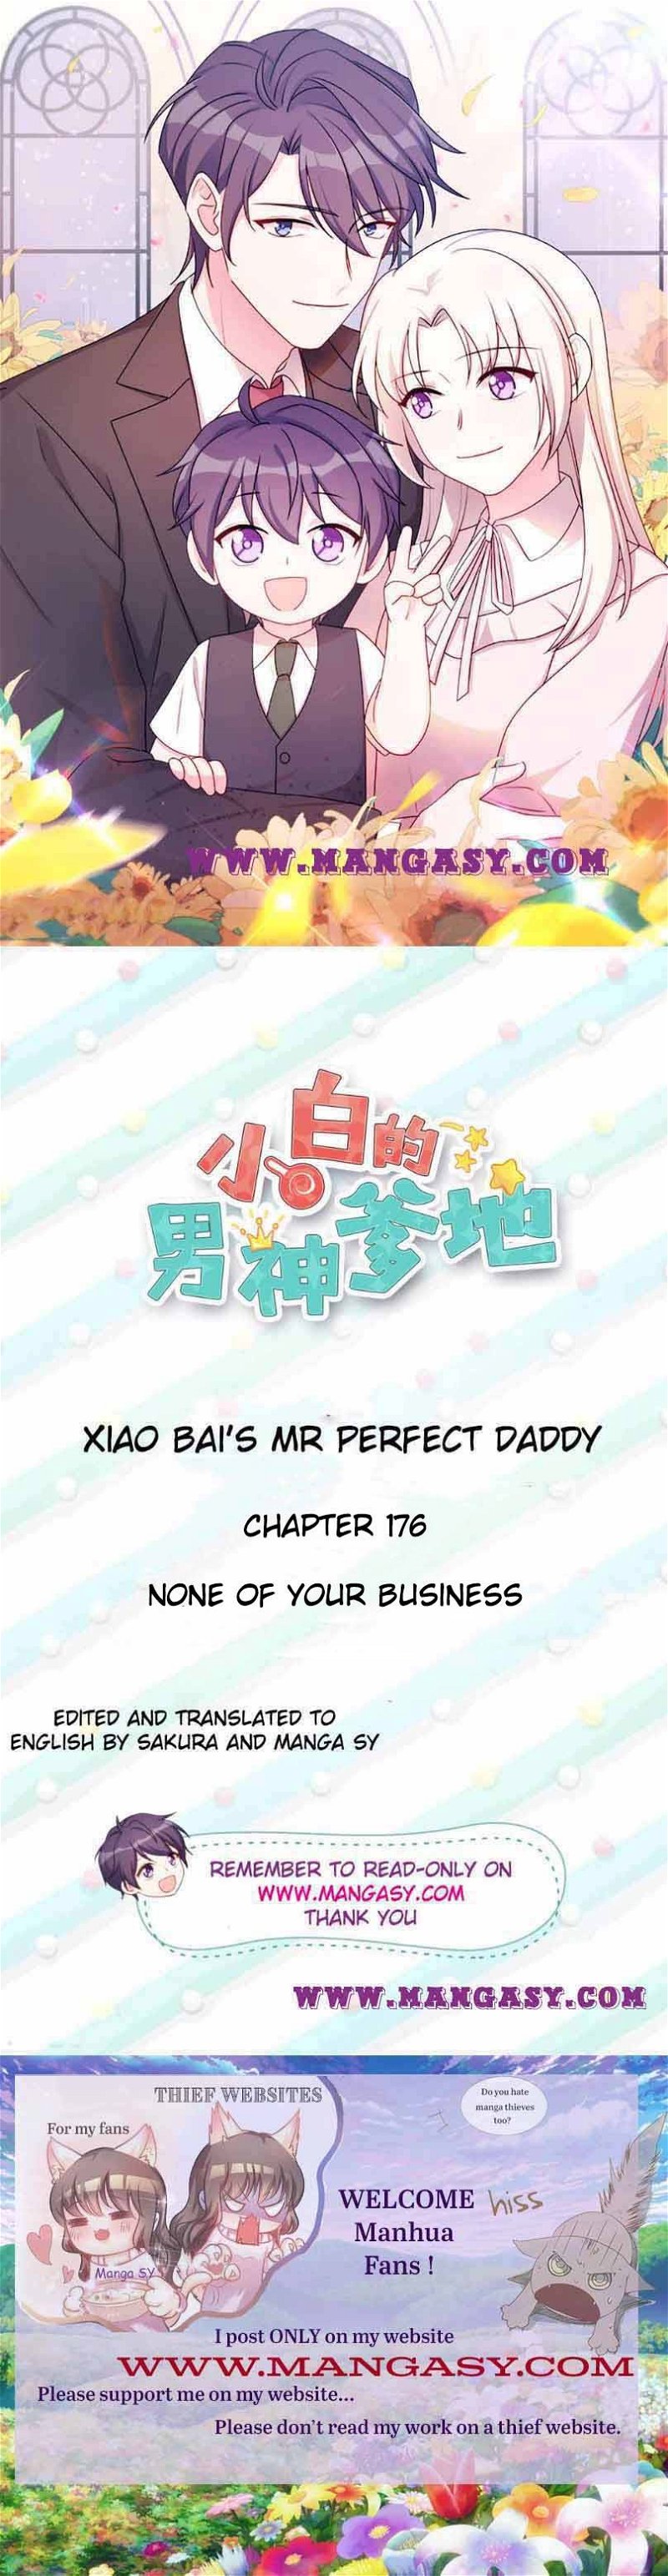 Xiao Bai’s father is a wonderful person Chapter 176 - Page 0